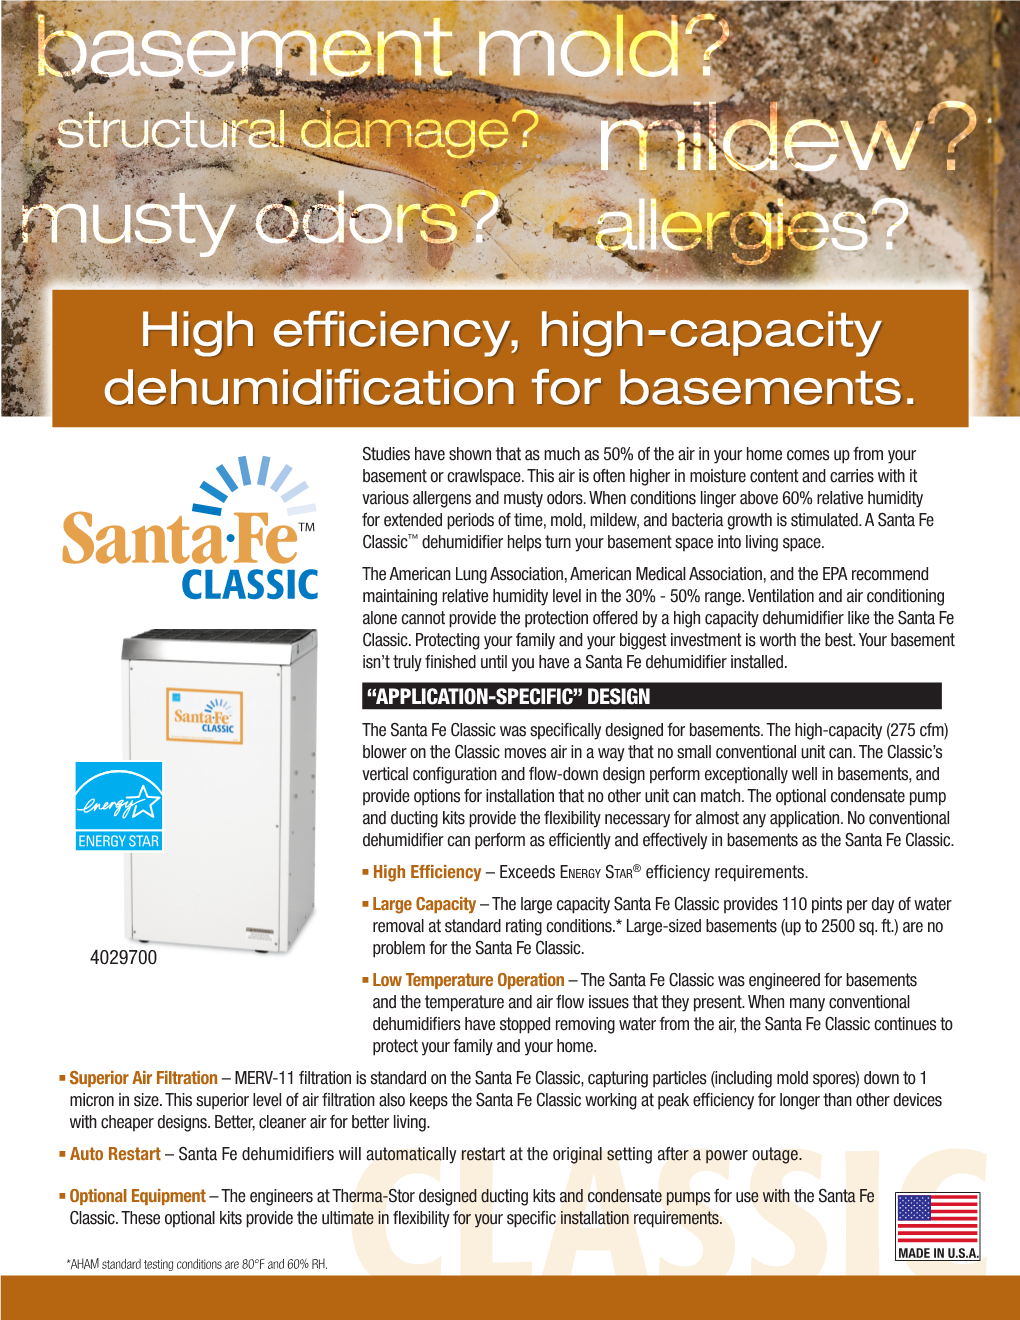 Mildew? Musty Odors? Allergies? High Efficiency, High-Capacity Humidity Meters Dehumidification for Basements